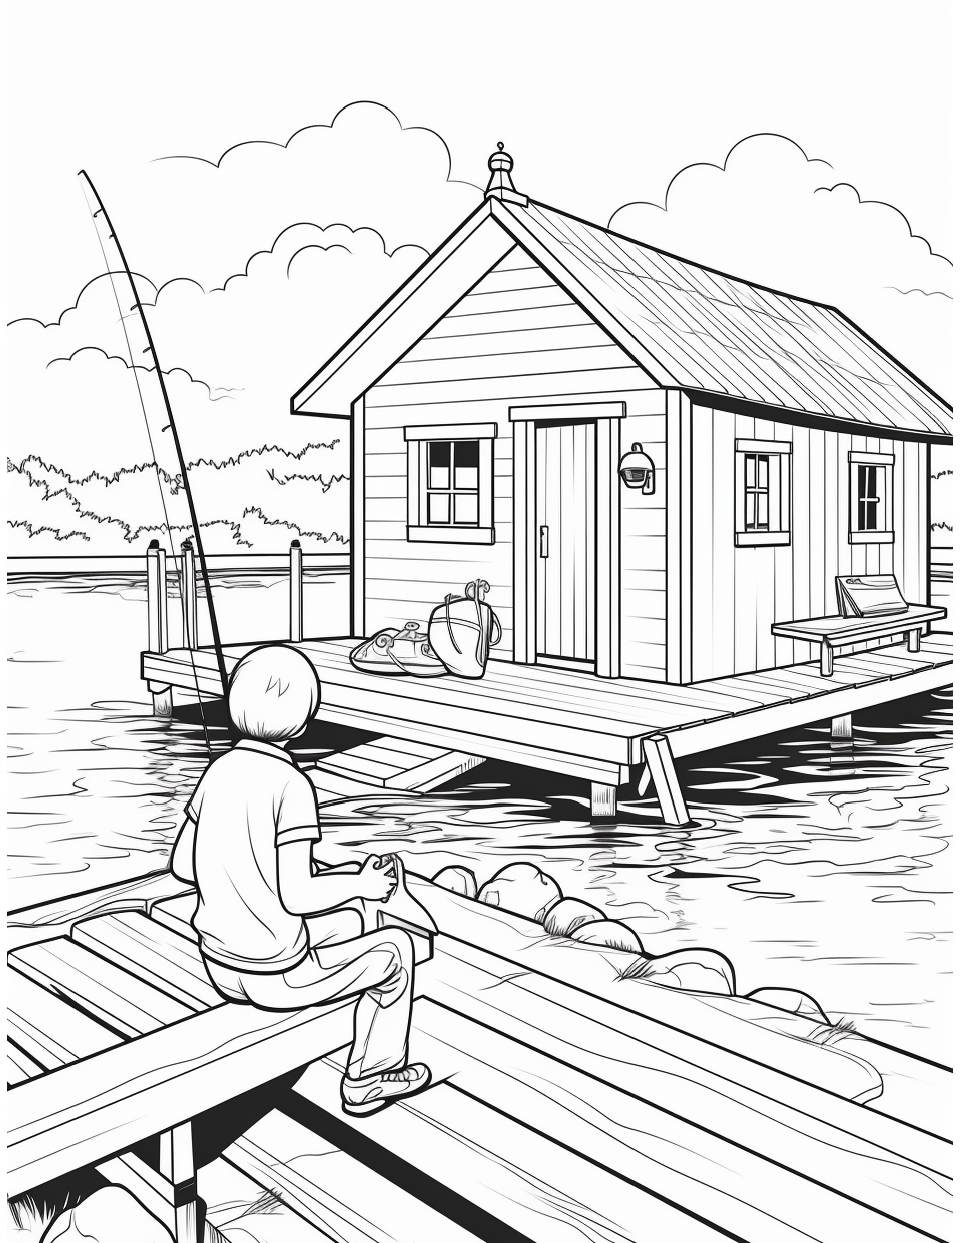 Fishing Coloring Page 7 - Line drawing of a person fishing on the docks in front of a lodge